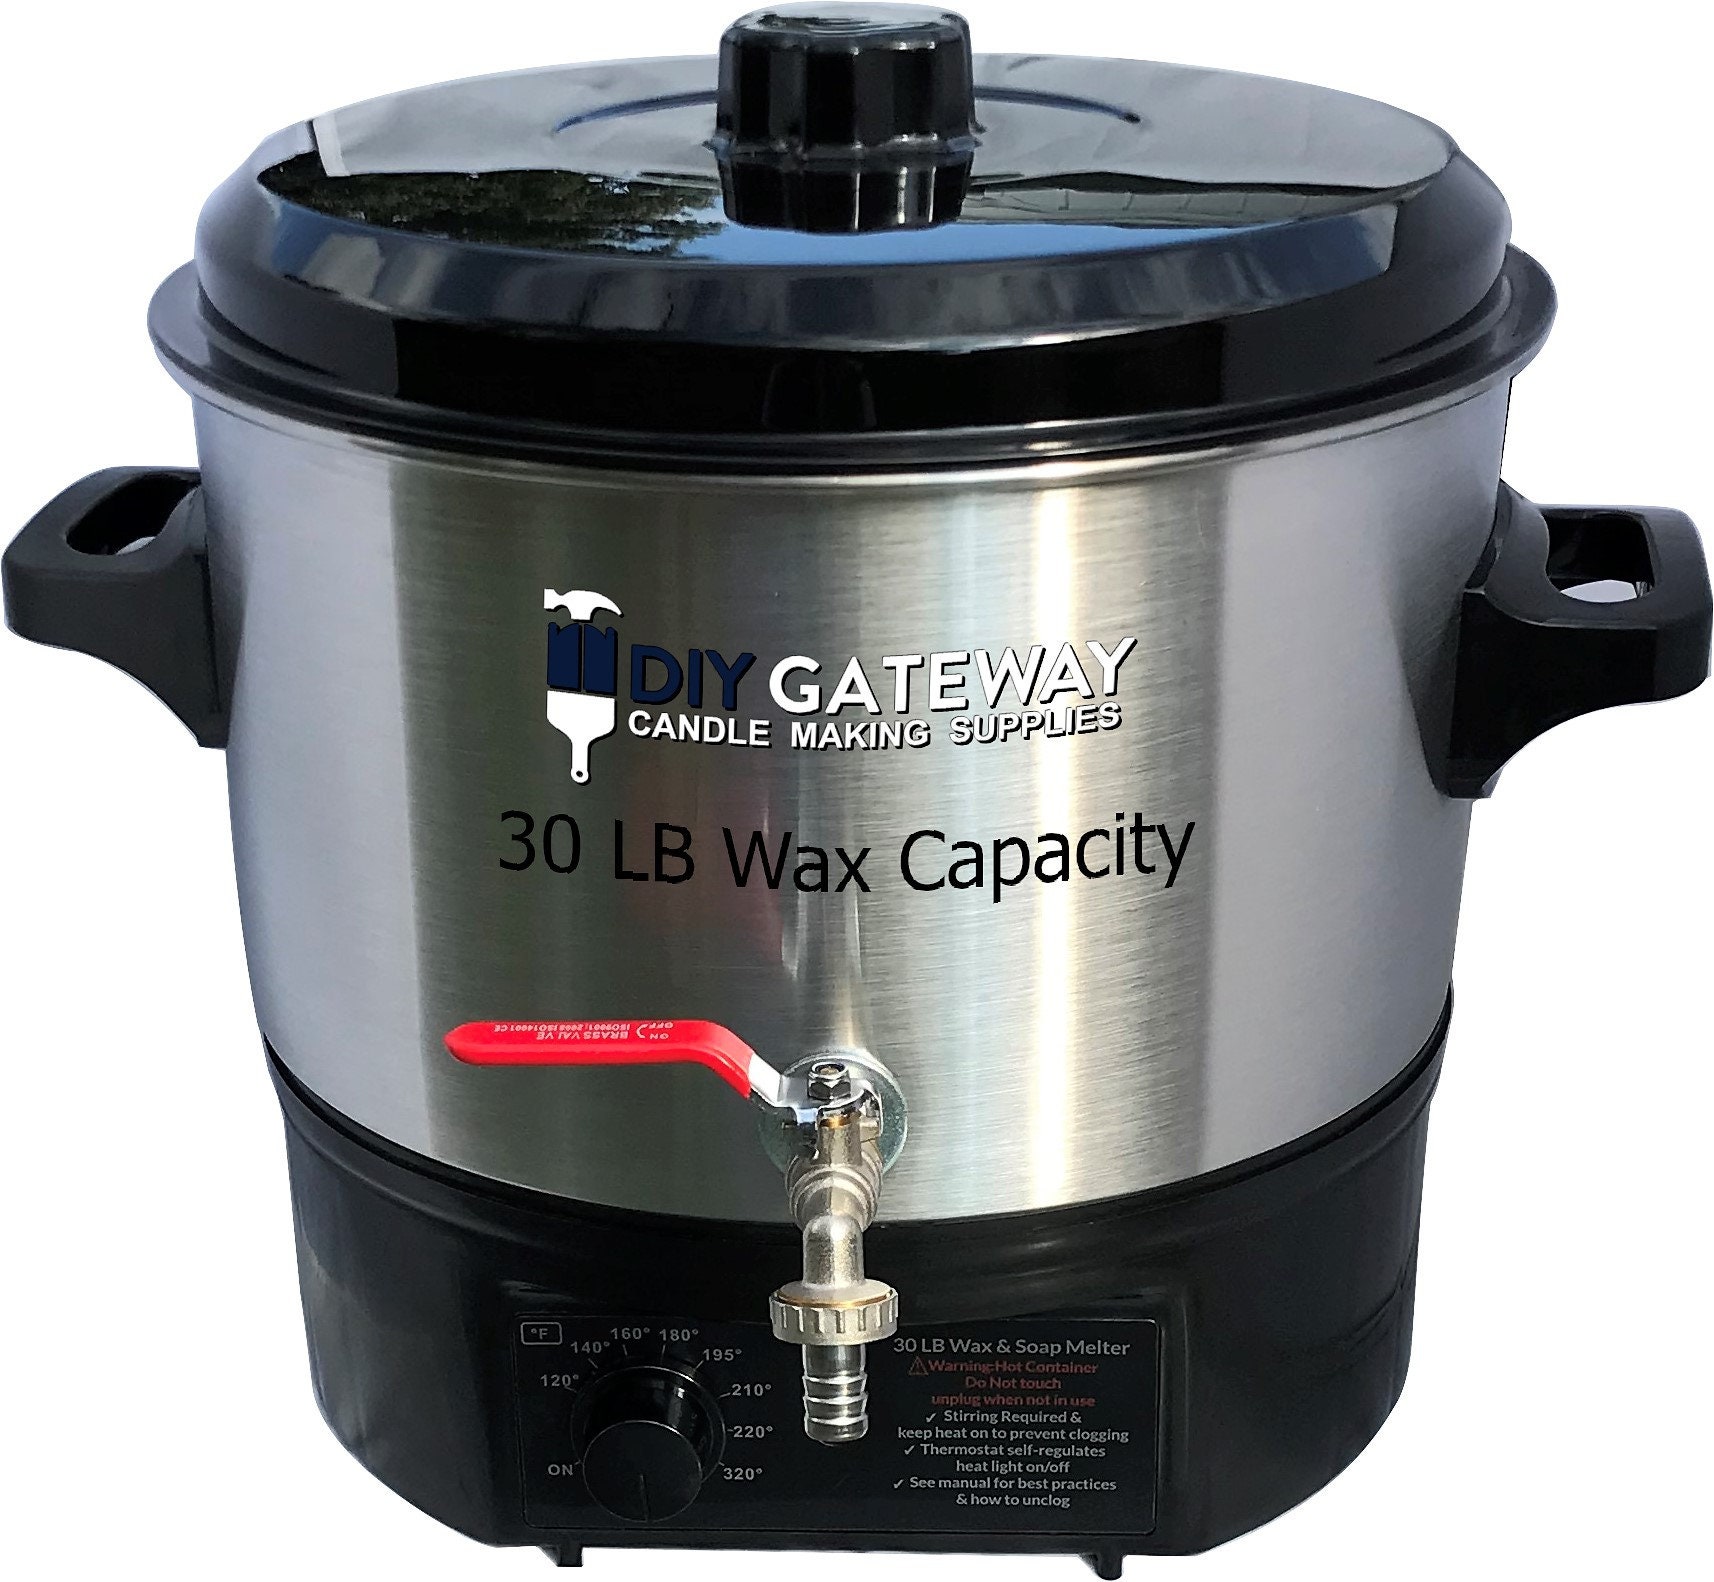 Large 17.5 LB Wax Melter for Candle Making: Electric Wax Melting Pot